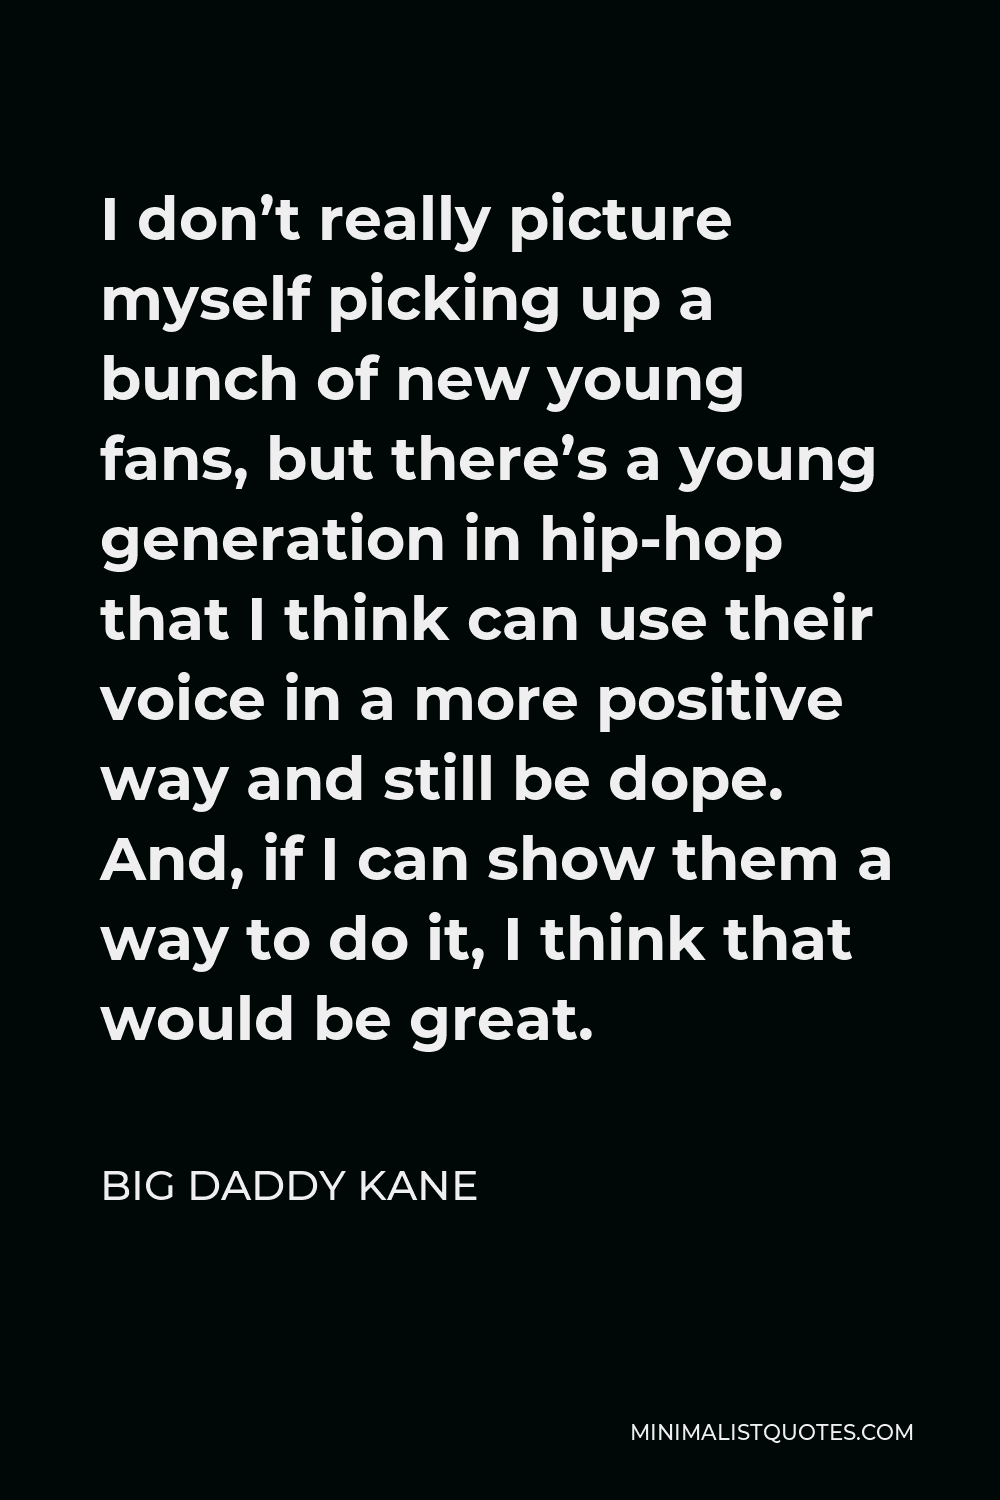 Big Daddy Kane Quote - I don’t really picture myself picking up a bunch of new young fans, but there’s a young generation in hip-hop that I think can use their voice in a more positive way and still be dope. And, if I can show them a way to do it, I think that would be great.